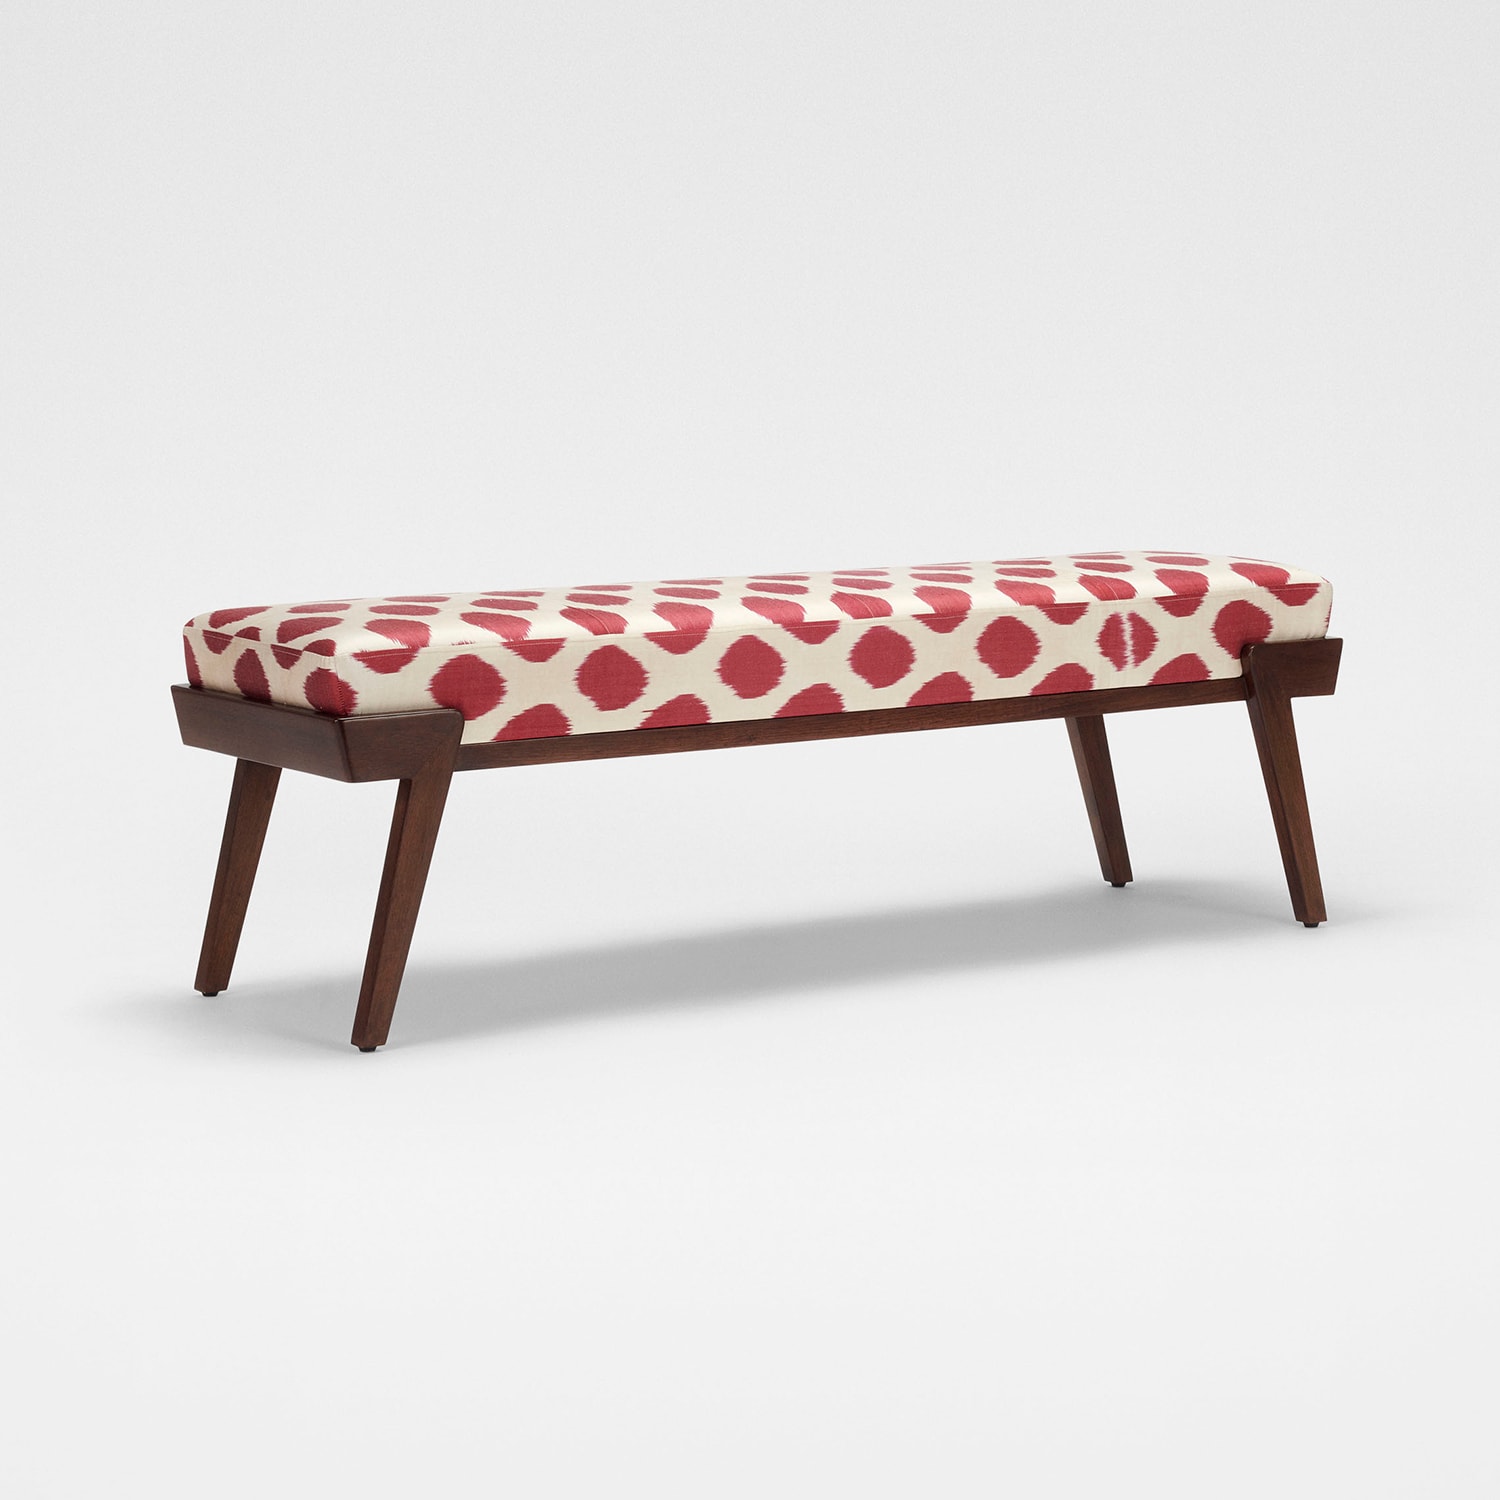 Svelte bench in teakwood frame and upholstered seat in a bold central asian silk ikat